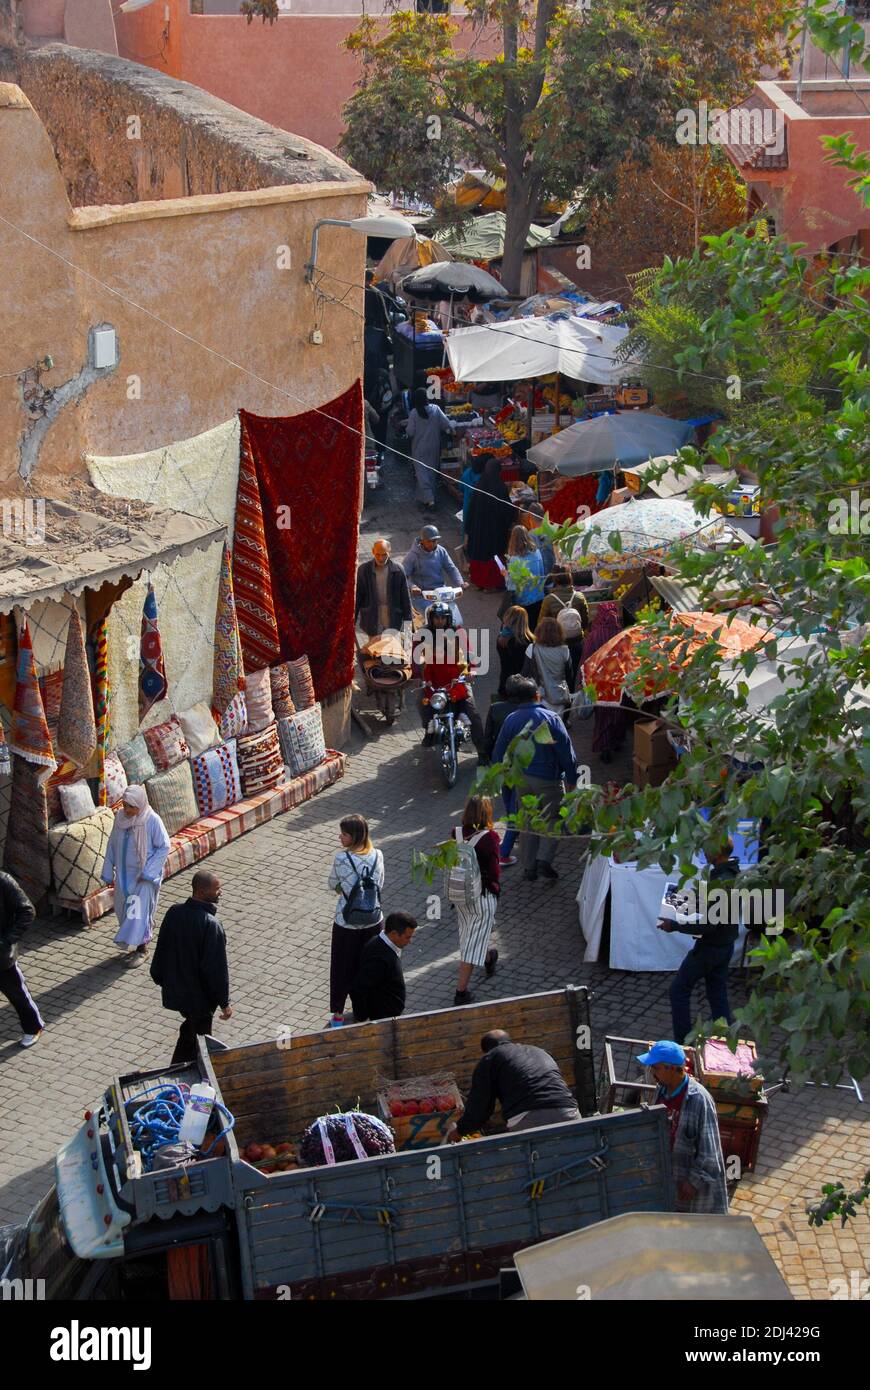 Rooftop view of Souk near Jemaa el Fna Market Square, Marrakesh, Morocco Stock Photo